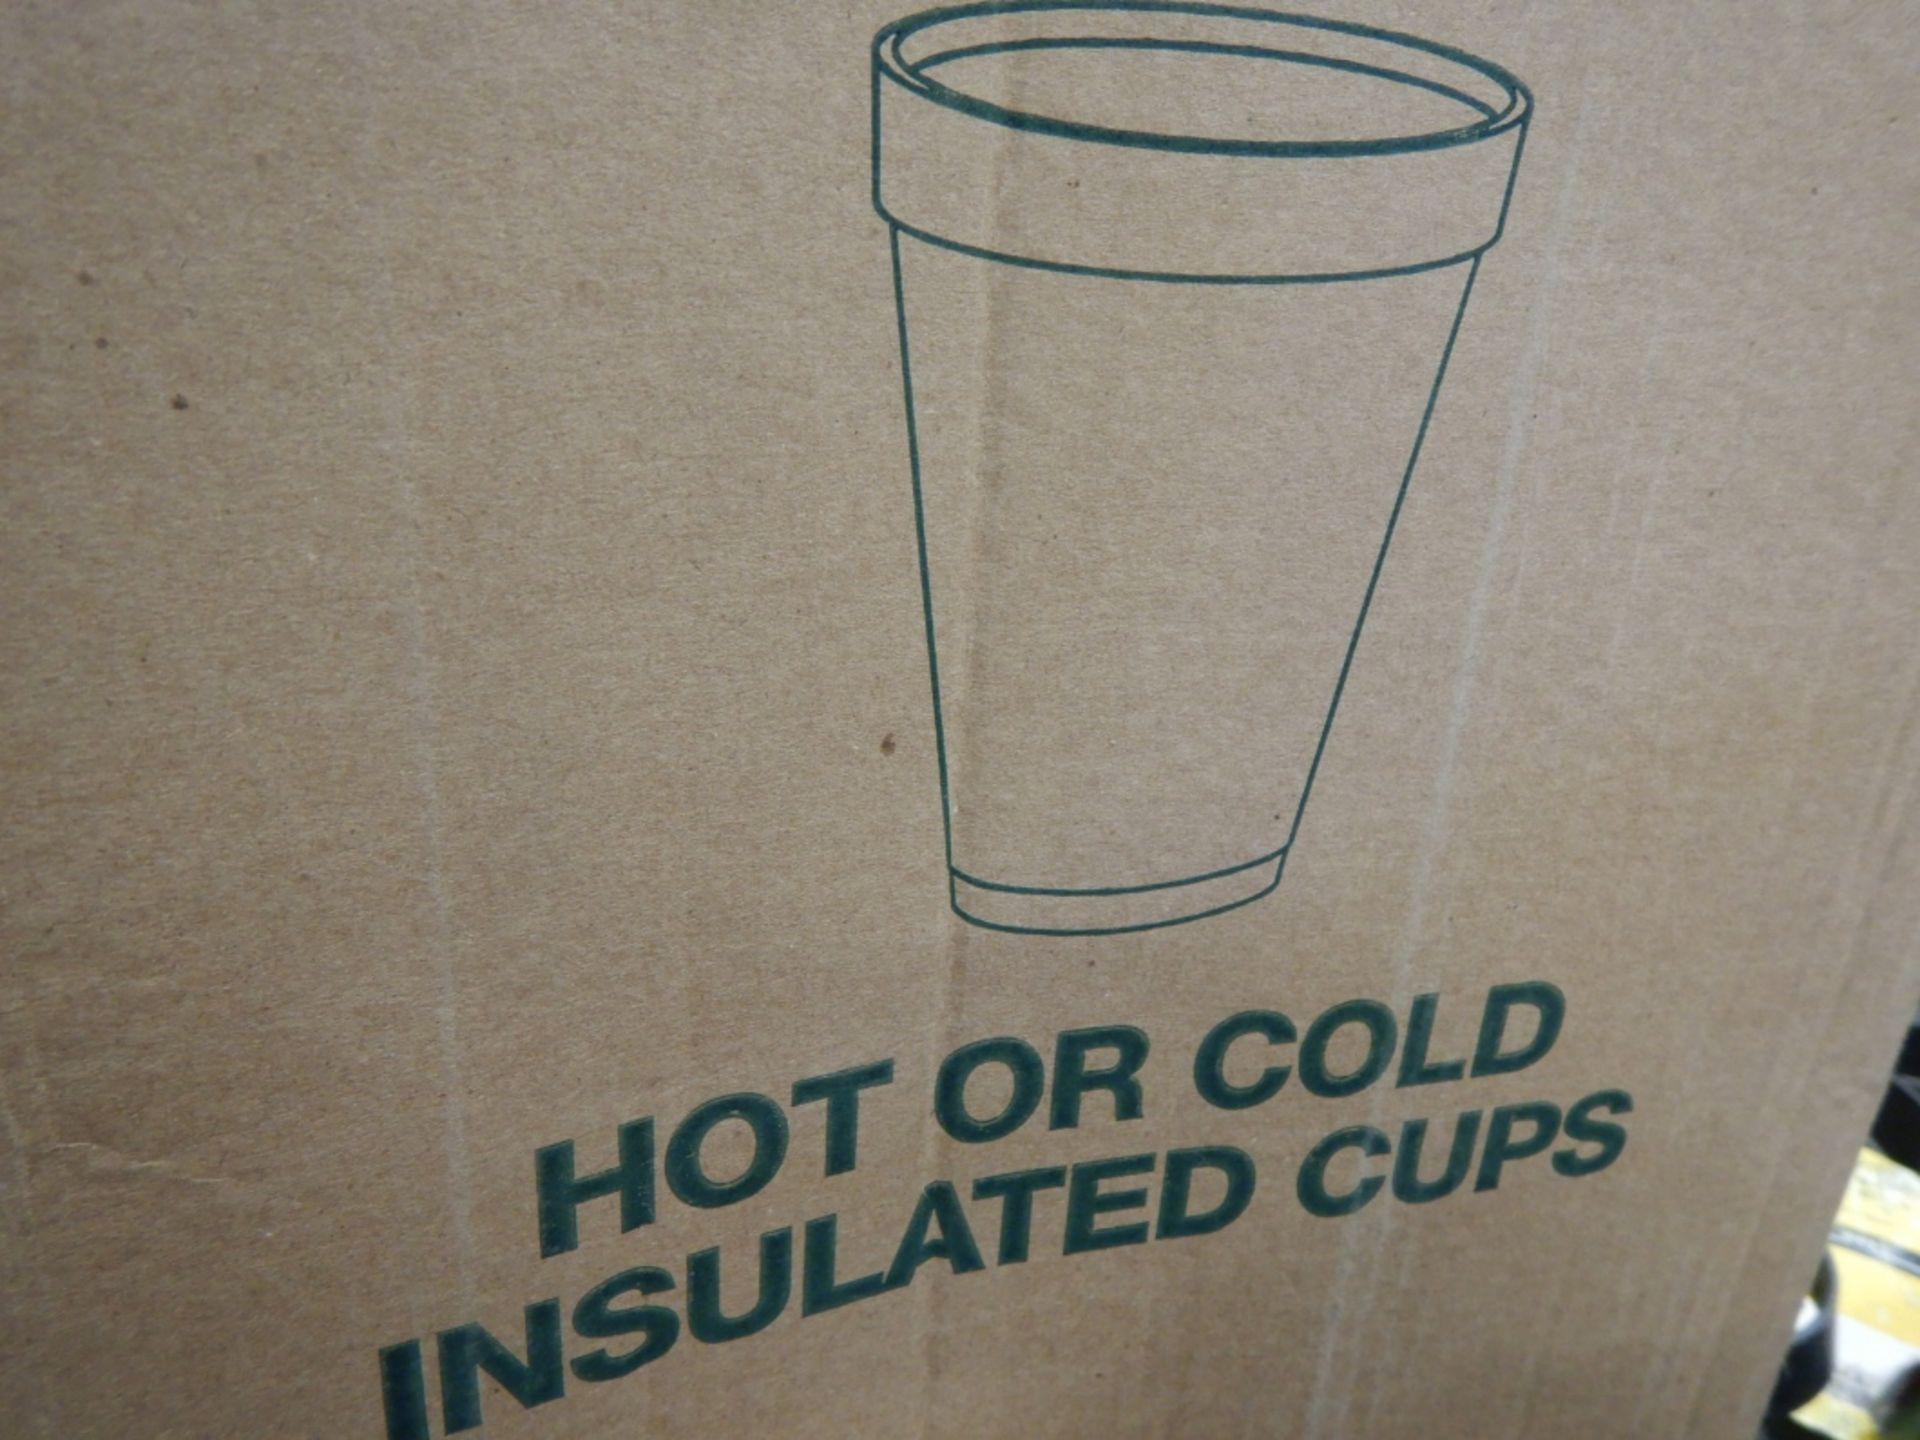 MOBICOOL MB32 12V COOLER, THERMOS AND BOX OF STYROFOAM J-CUPS - Image 6 of 6